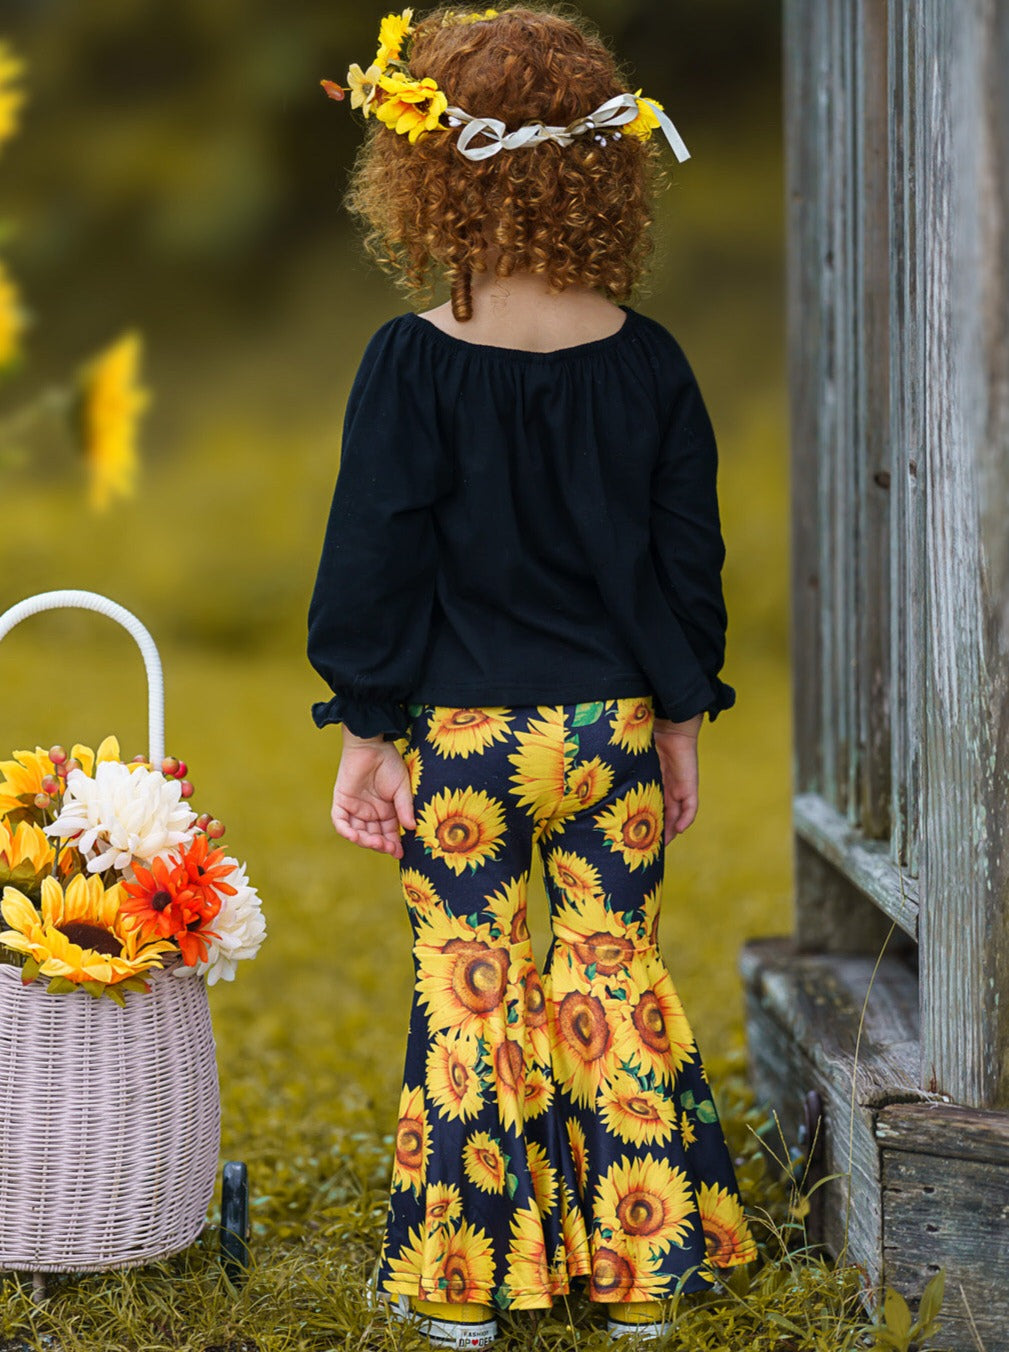 Little Girl's Bell Bottoms - Gold Floral – Daisy Del Sol